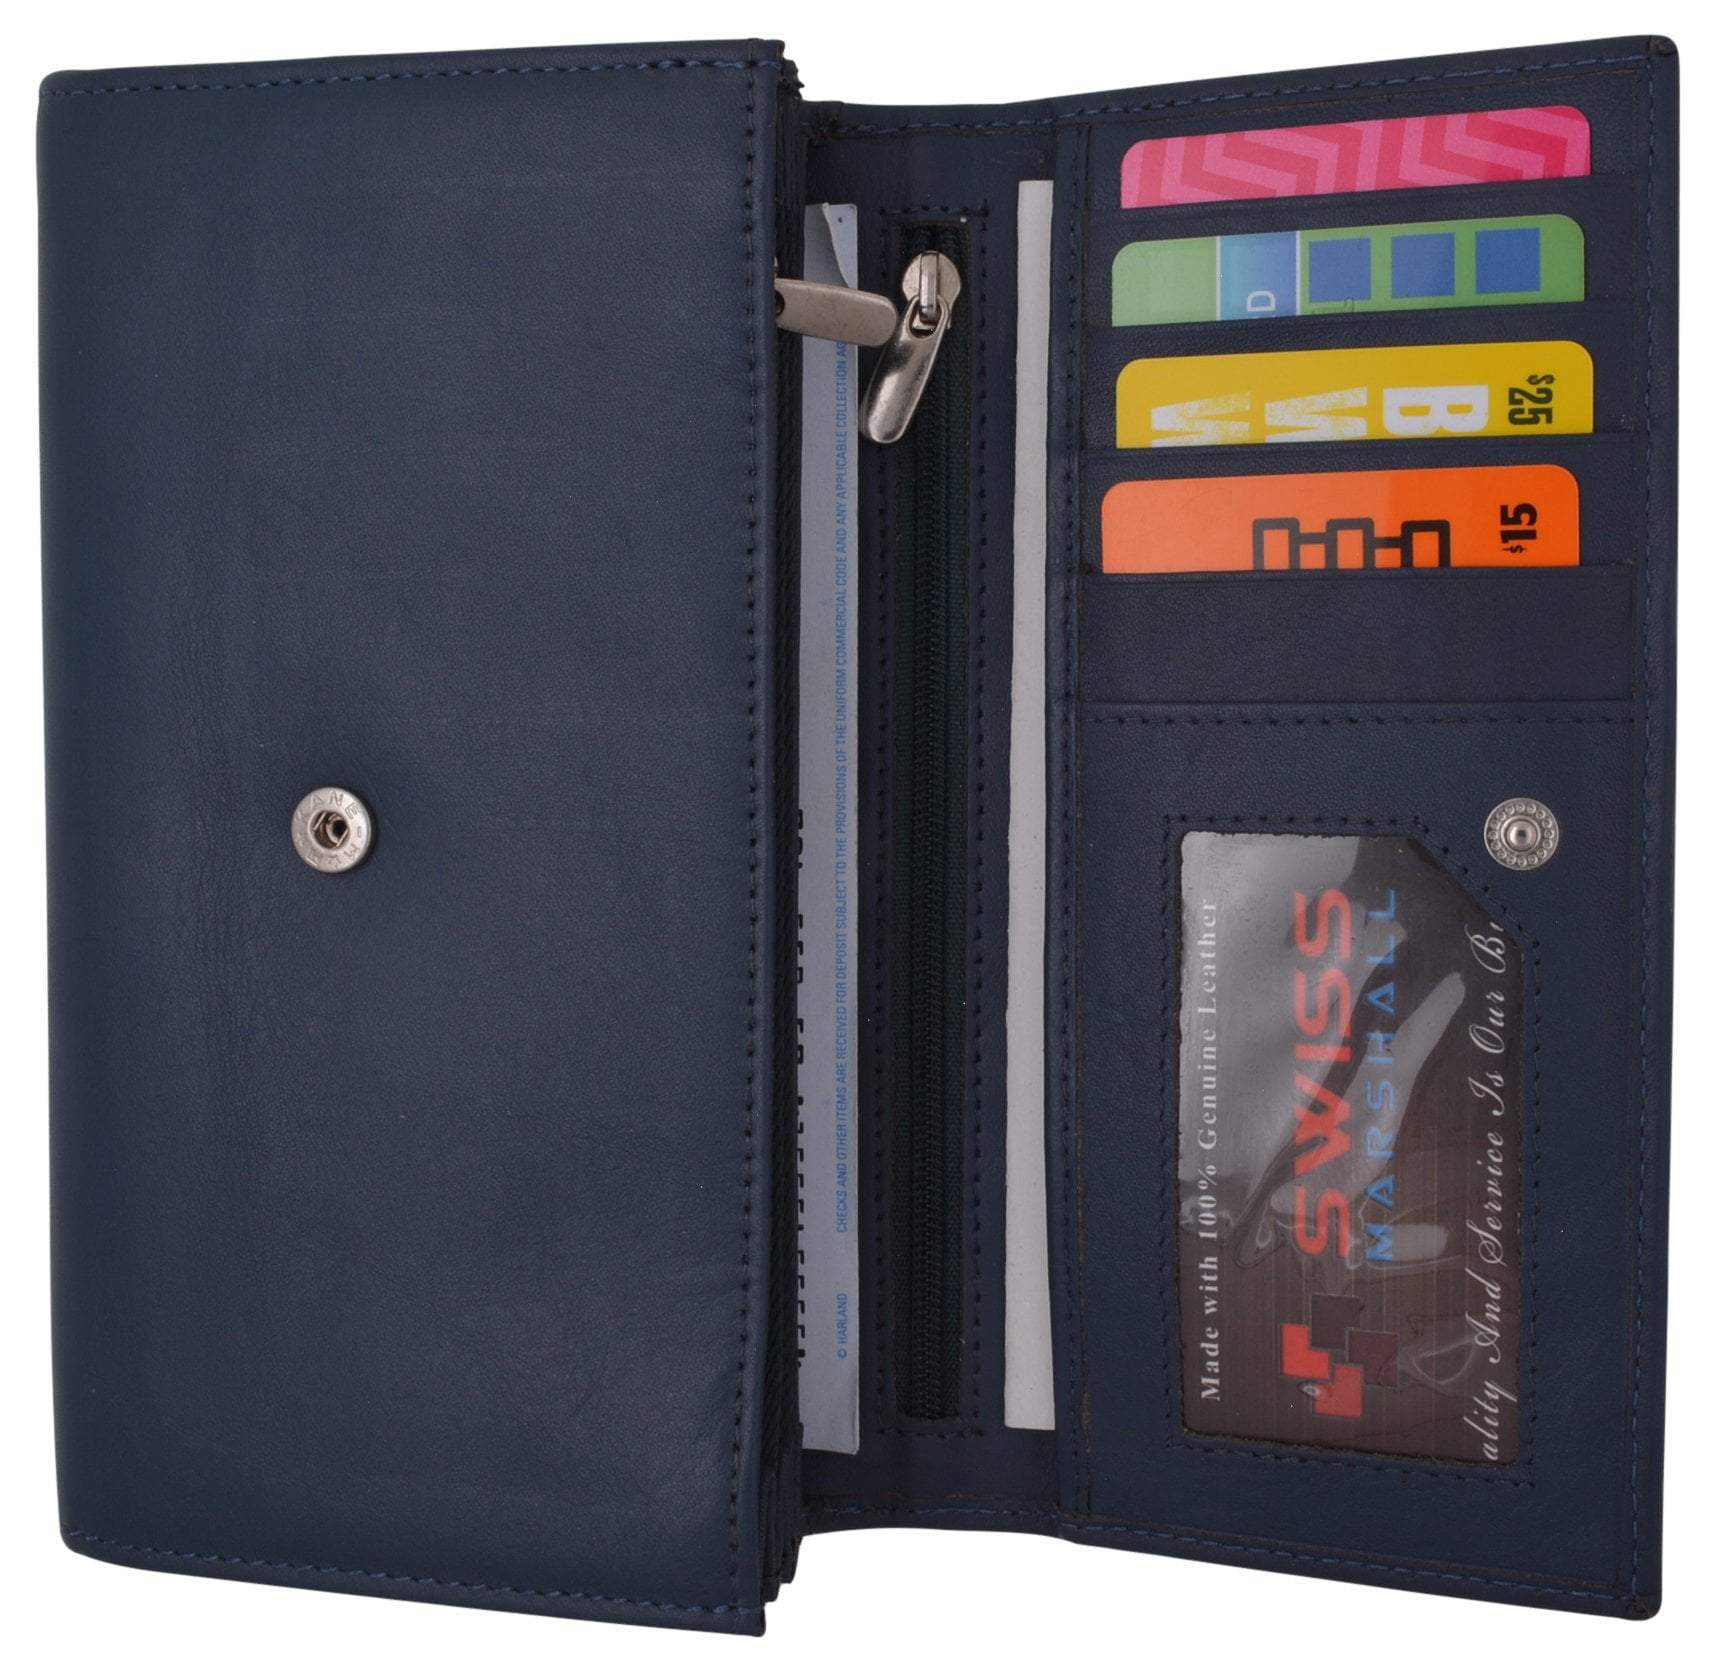 Women's Wallets, Large Capacity with RFID Protection, Genuine